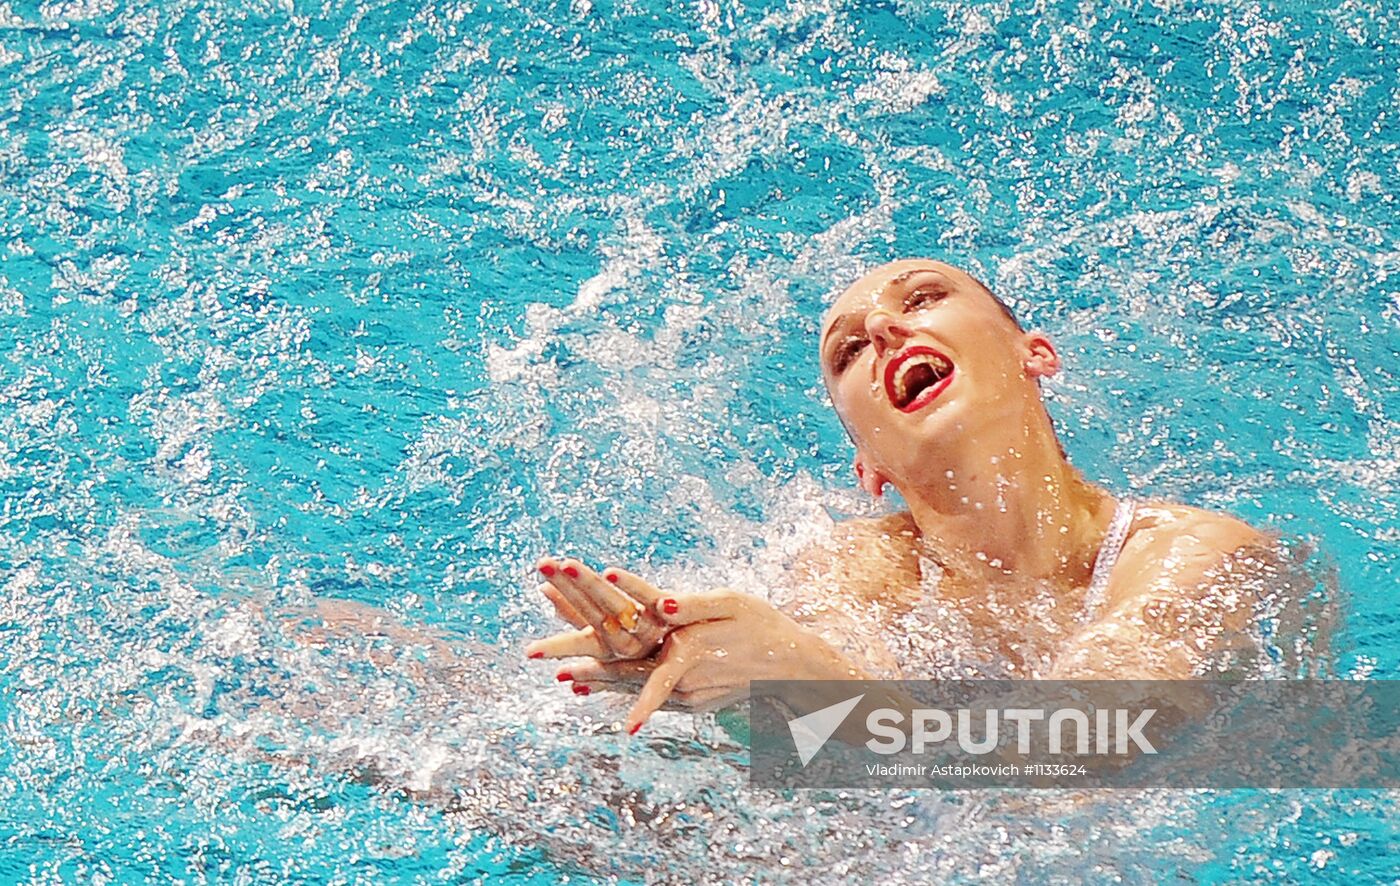 European synchronized swimming championships. Day One